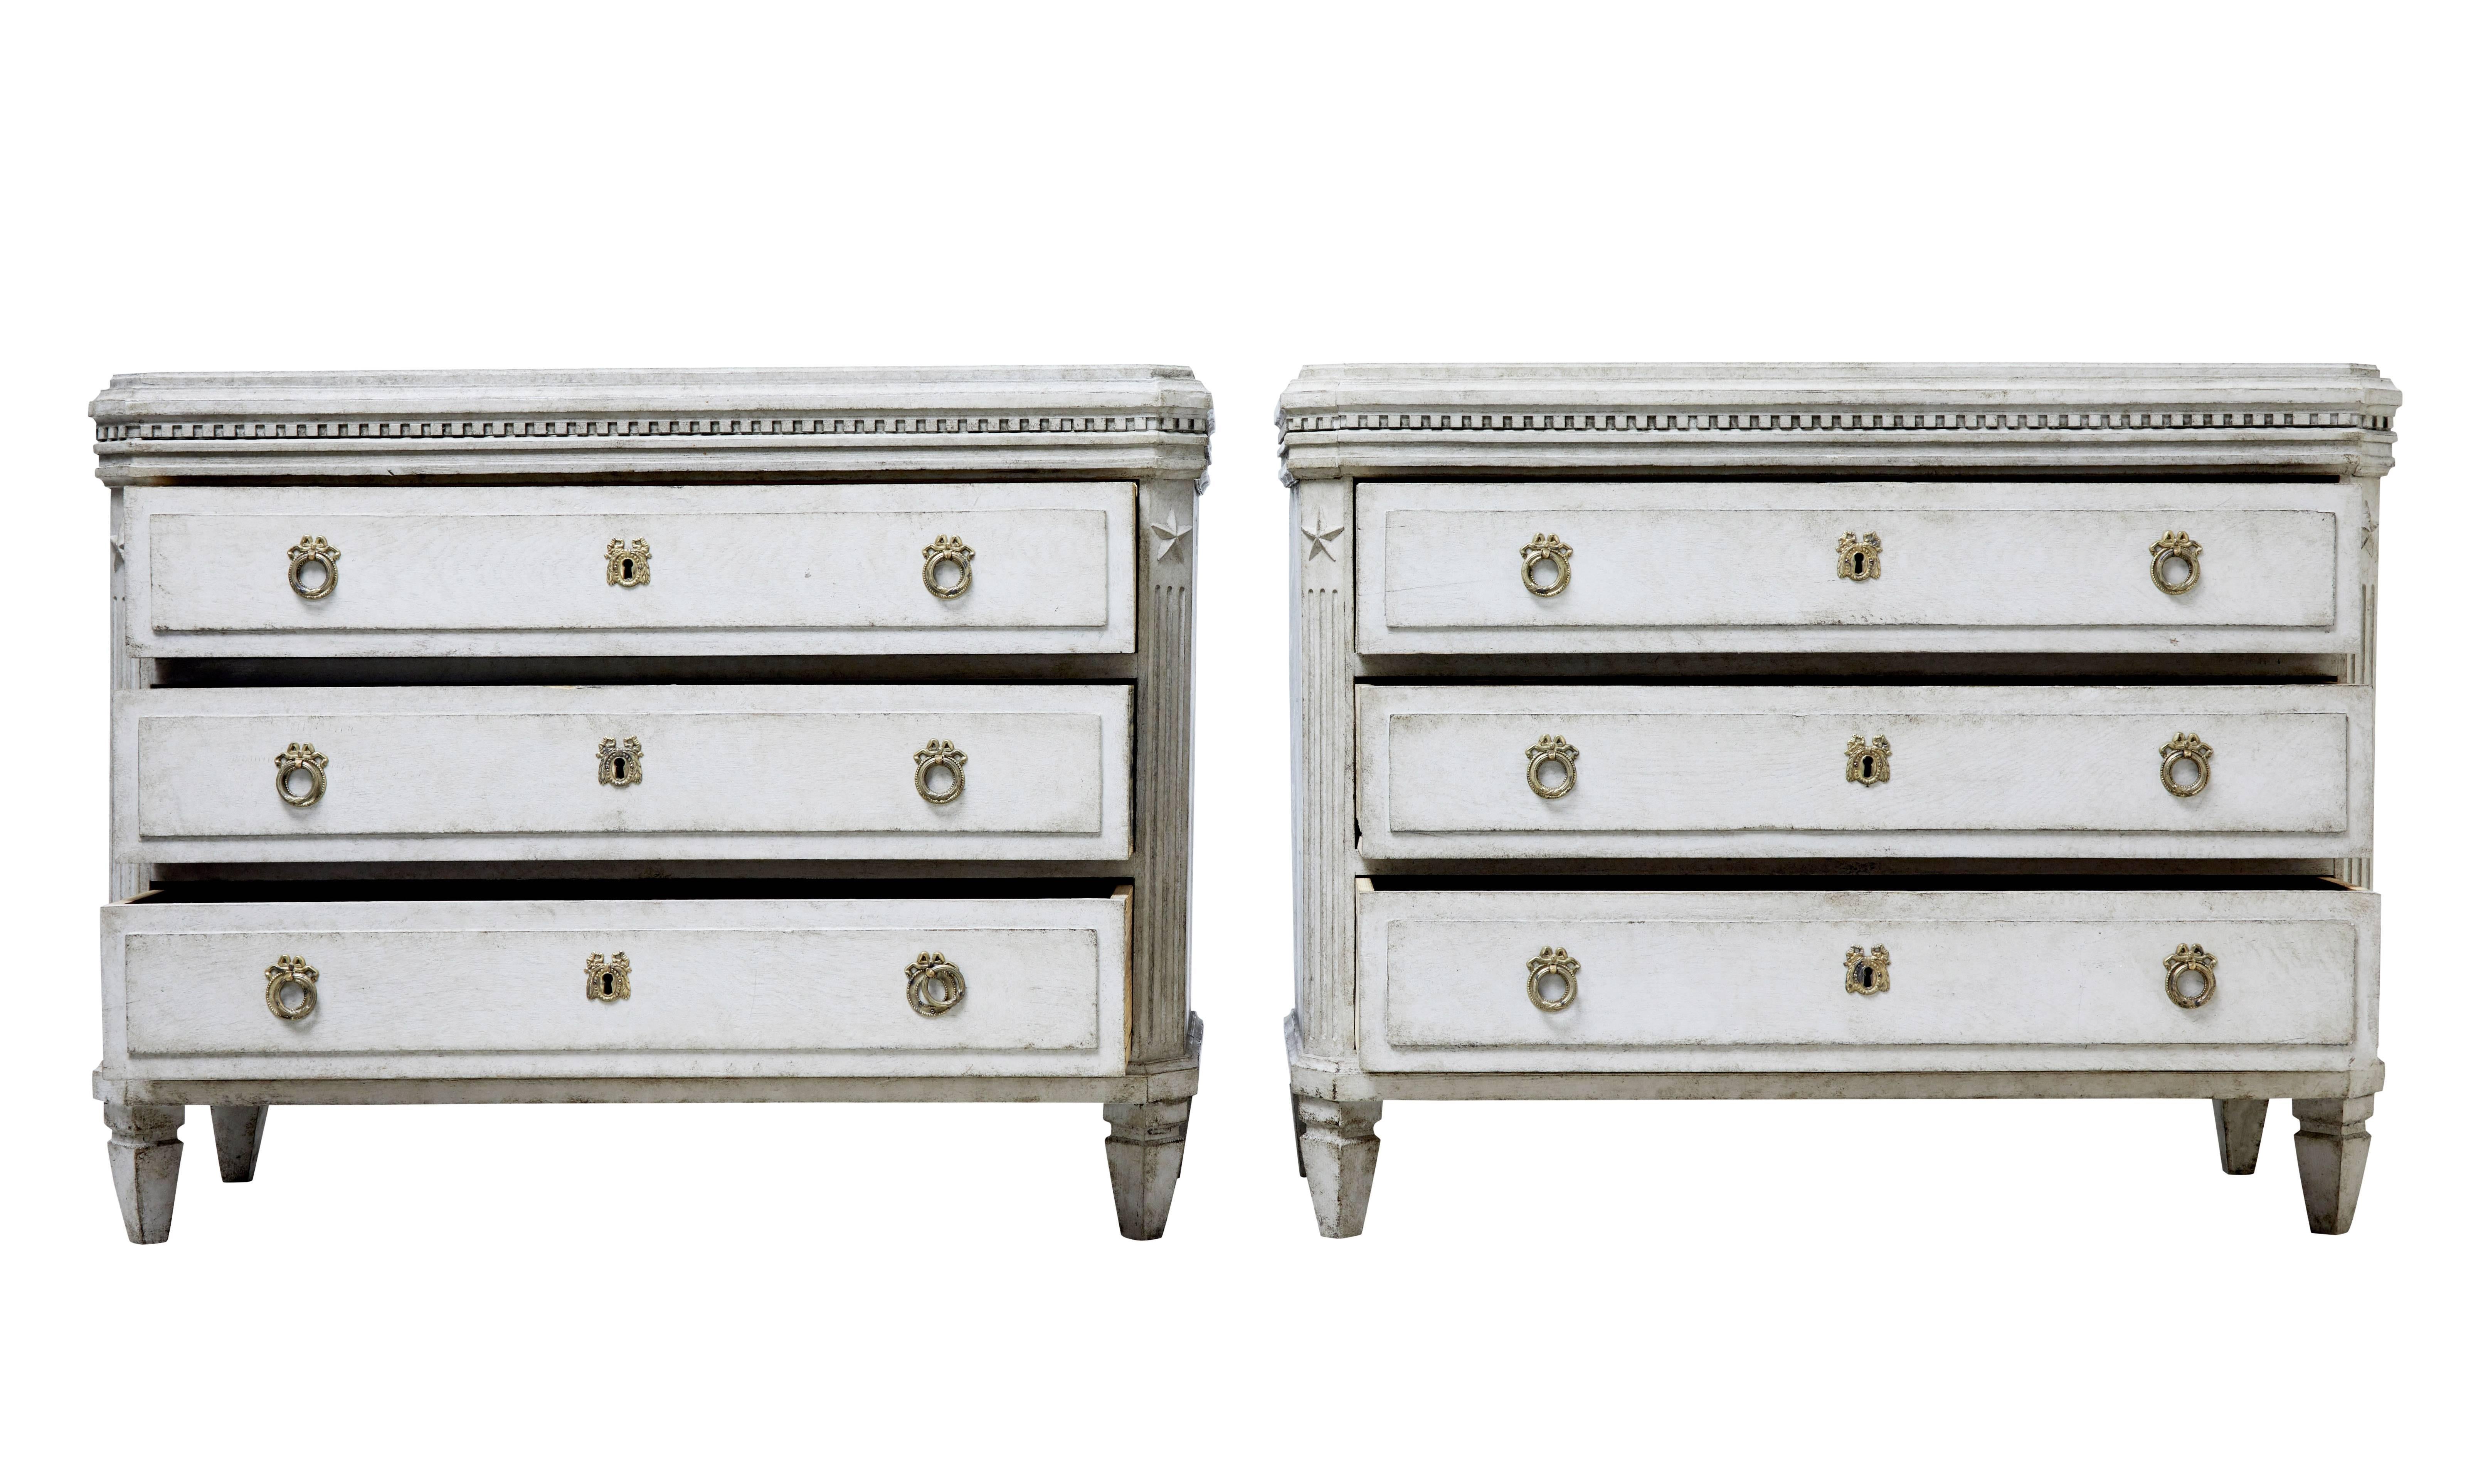 Good quality pair of Swedish commodes in the Gustavian taste, circa 1860.

Three drawers fitted with ornate brass hardware. Dentil detail below the shaped top. Canted corners with fluted elements and applied star motif.

Standing on short